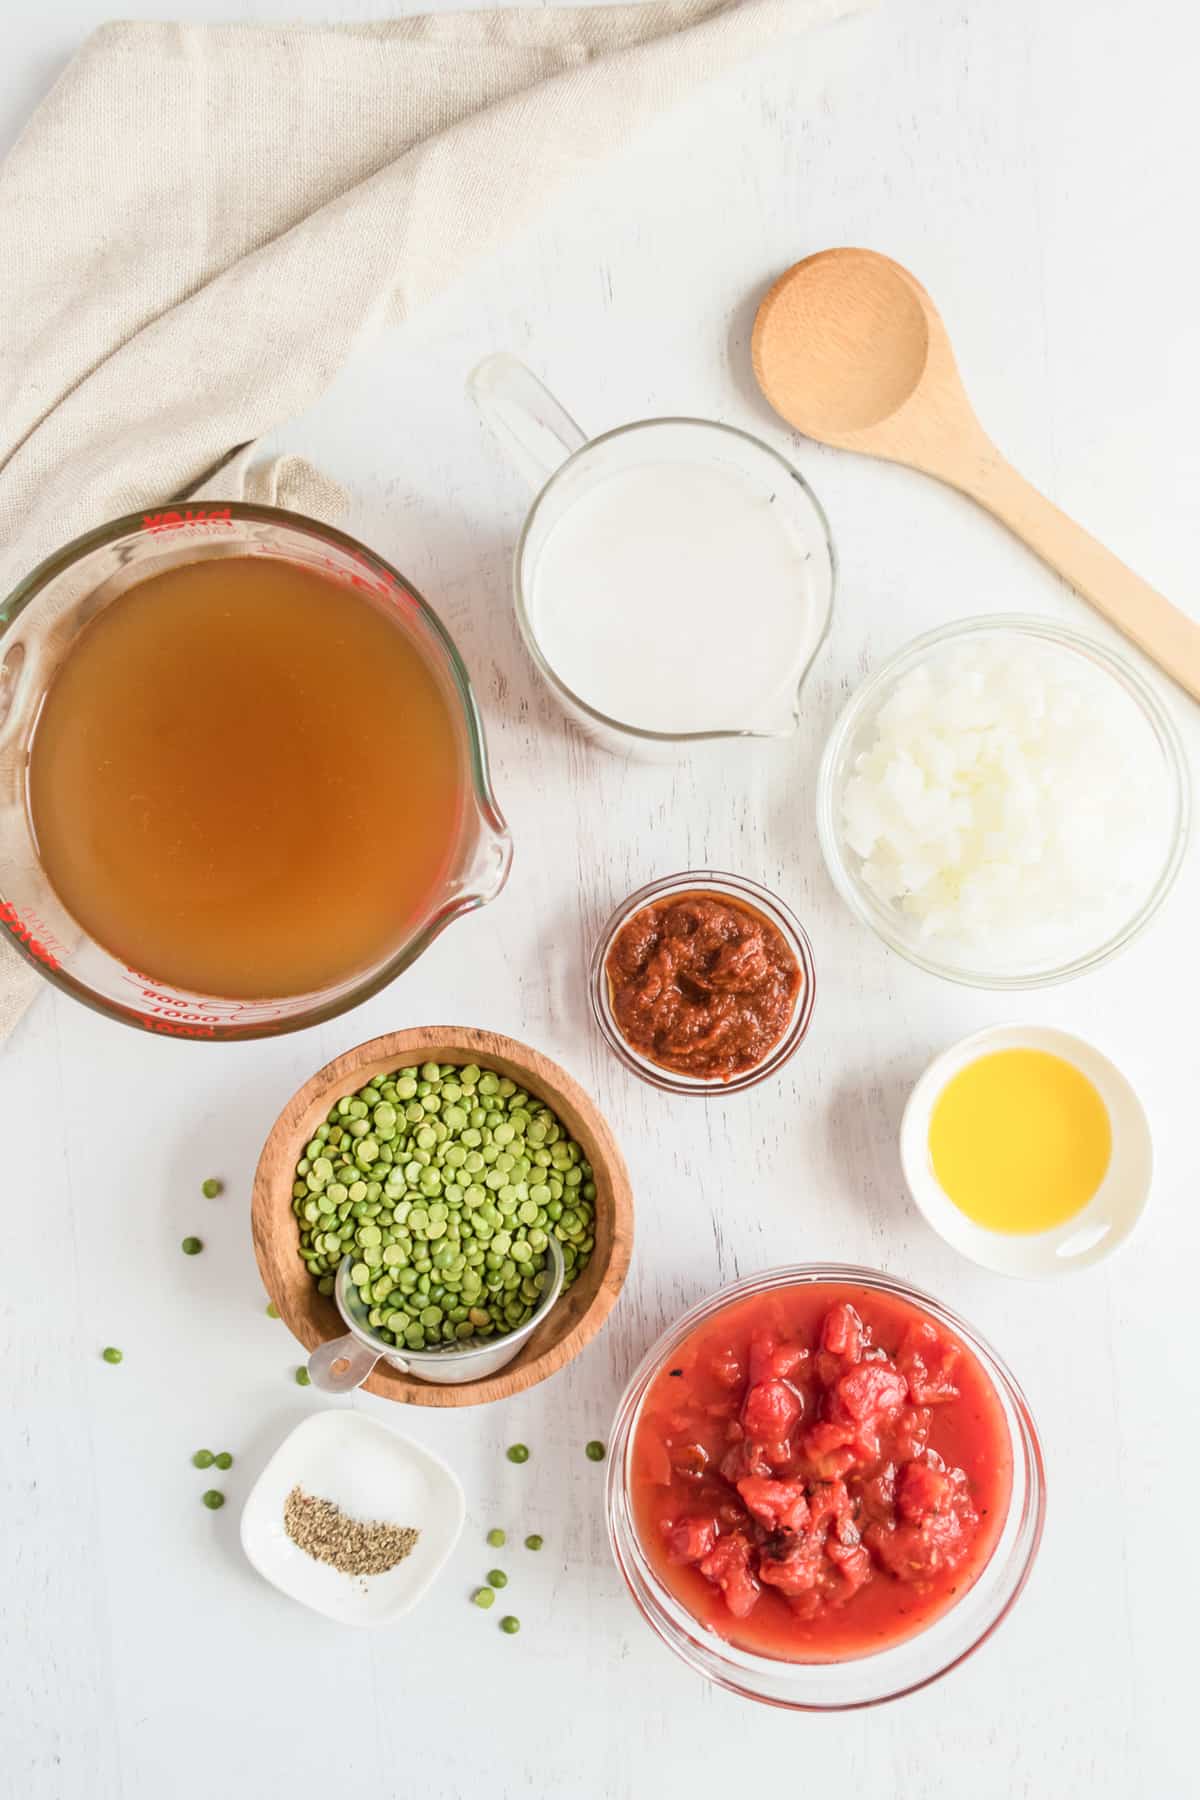 Ingredients to make curry sit together - vegetable broth, coconut milk, tomatoes, red curry paste, split peas, butter, and onion.